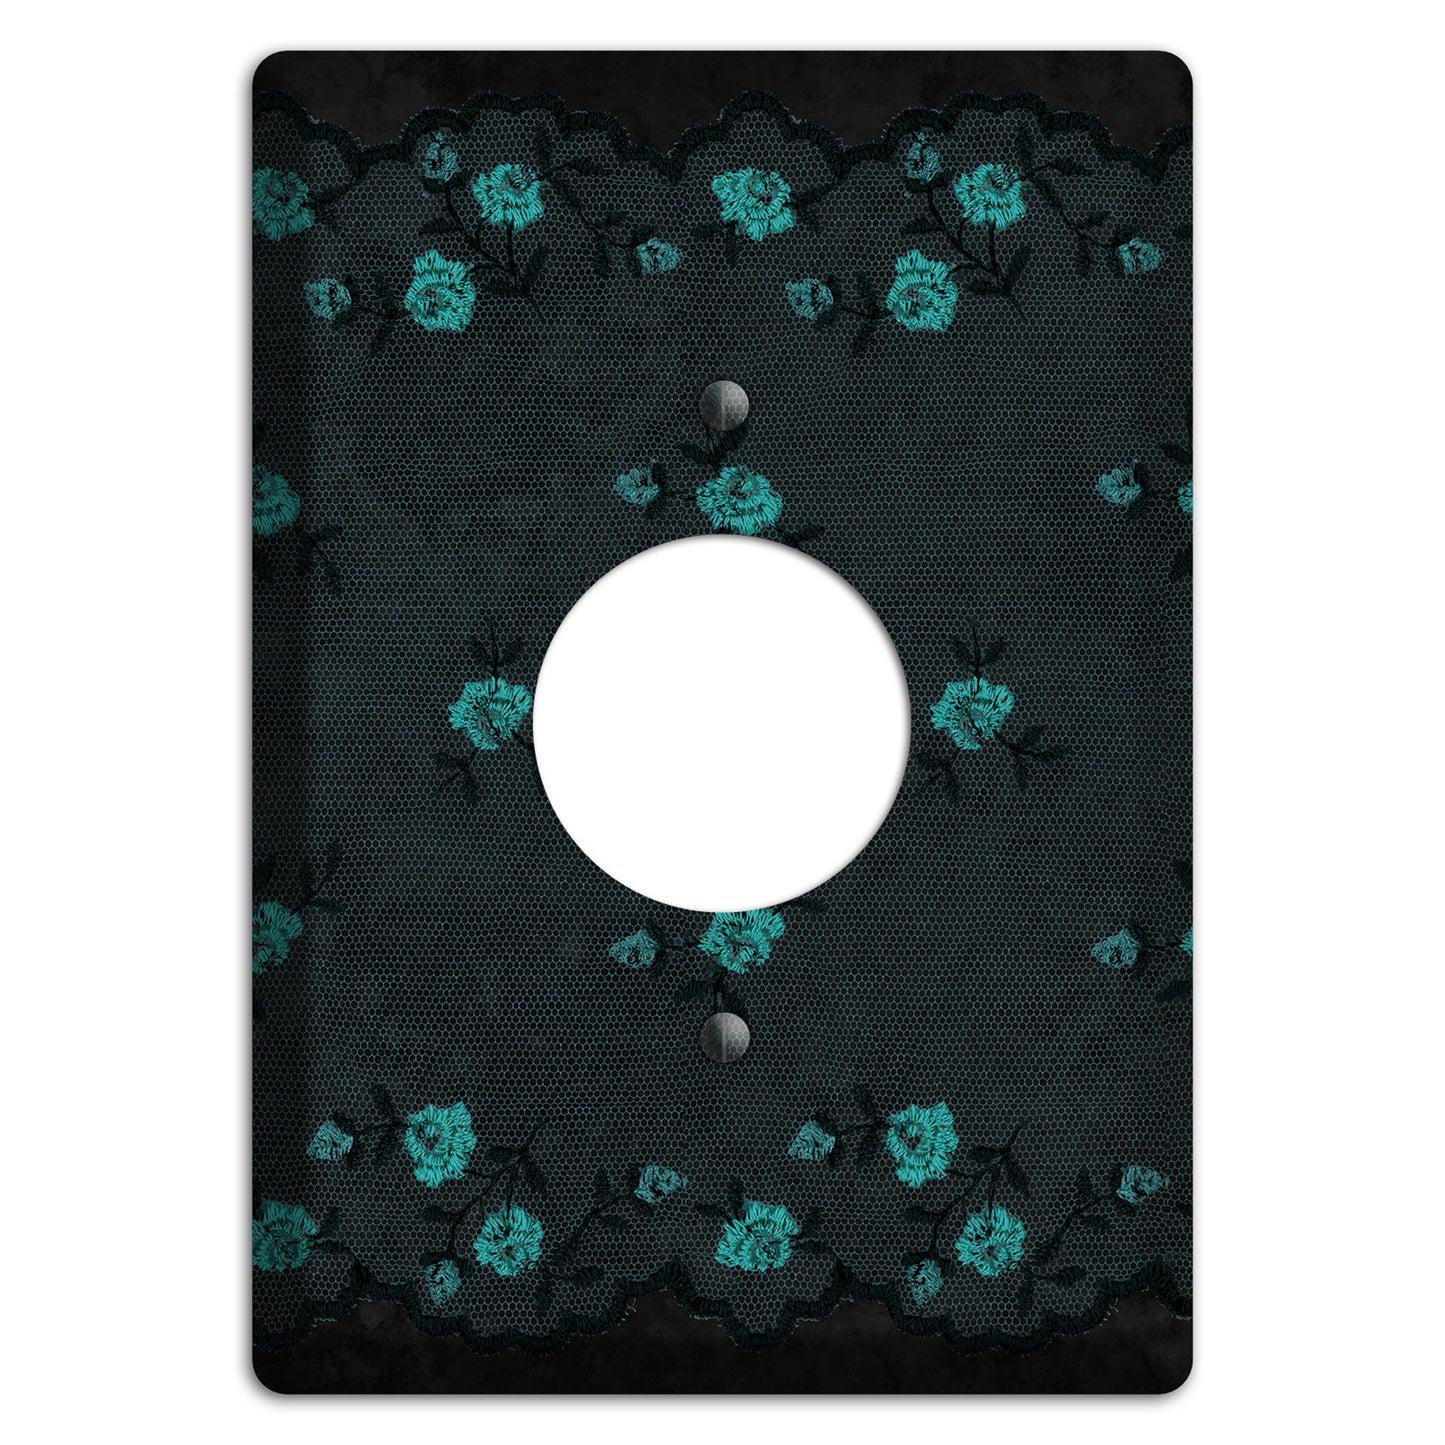 Embroidered Floral Black Single Receptacle Wallplate